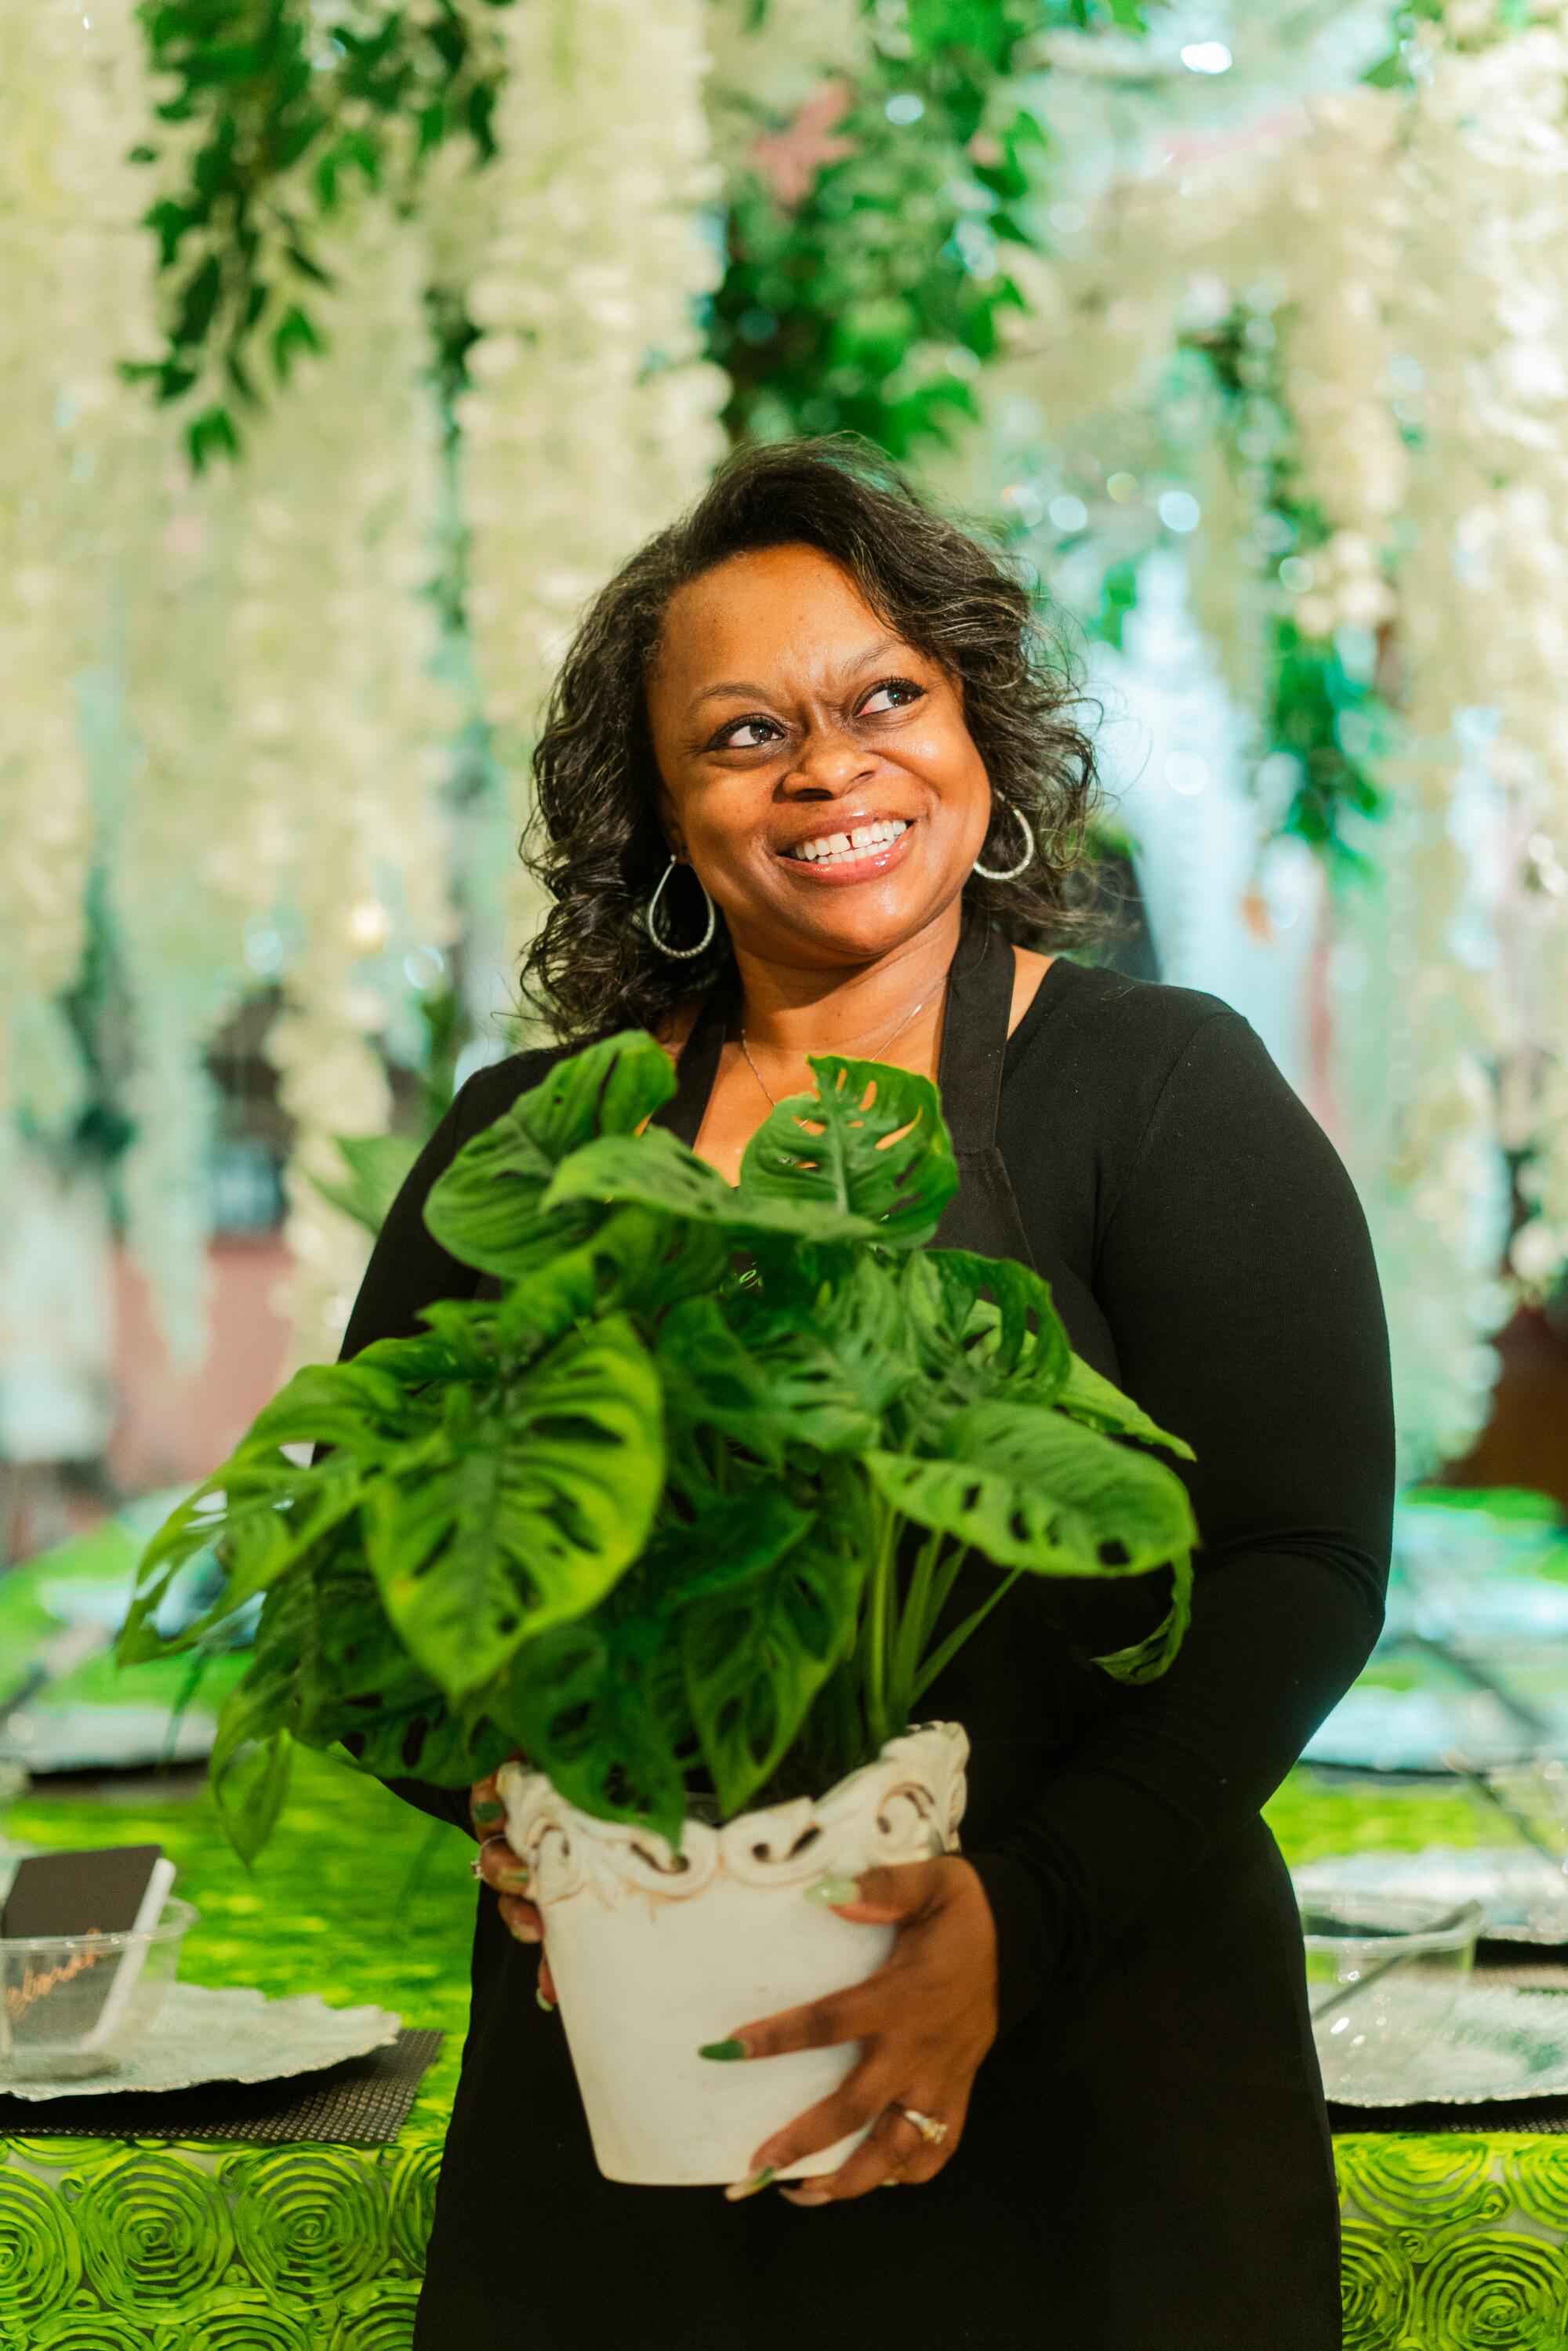 A smiling woman stands holding a healthy houseplant in a white pot